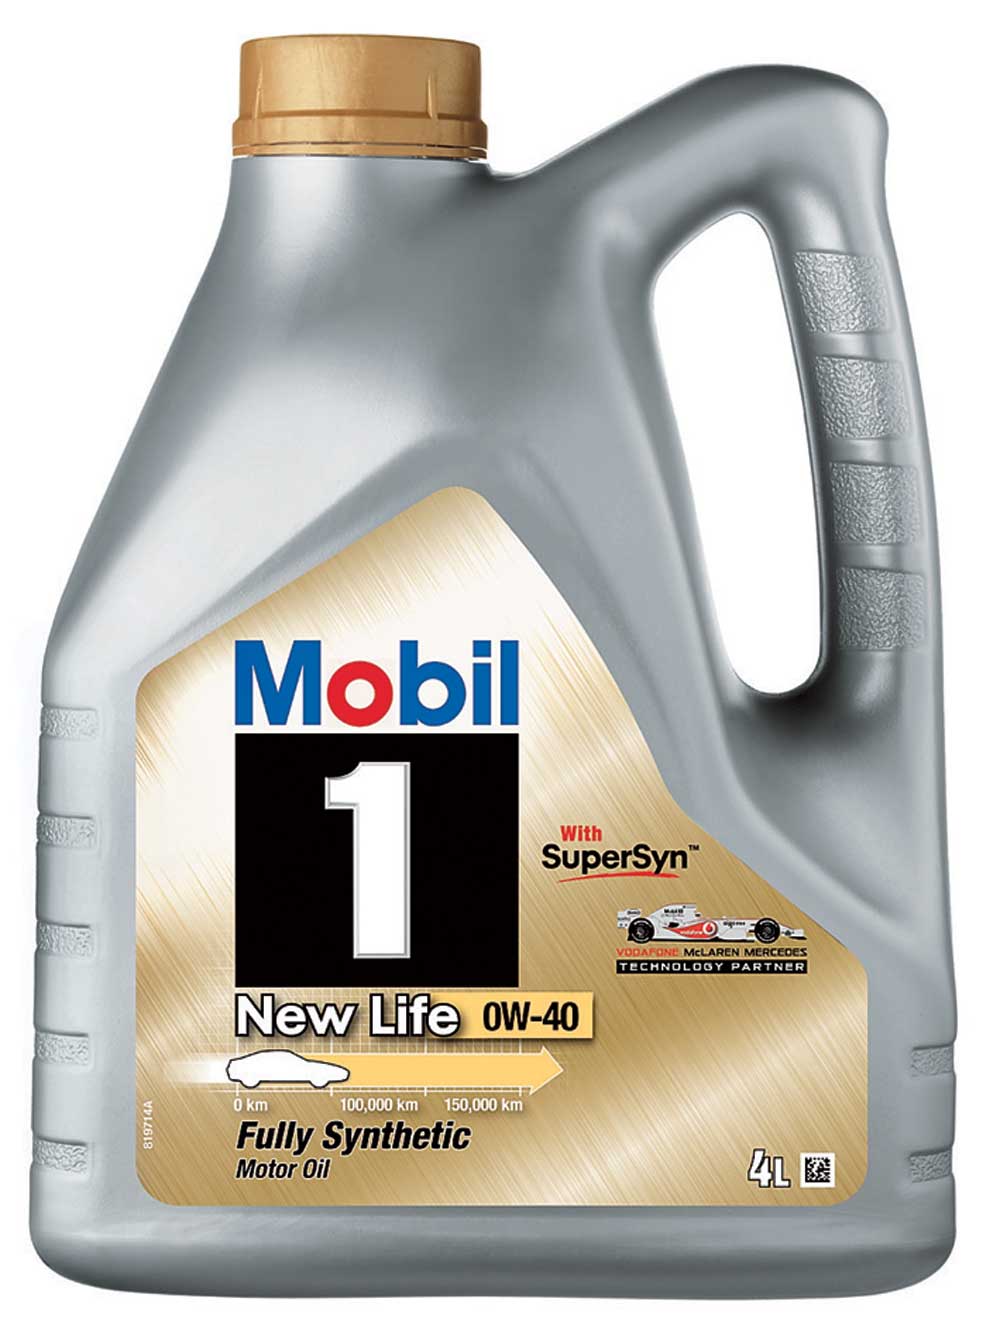 Mobil 1 New Life 0W-40 4?????? ???????? (?????????)